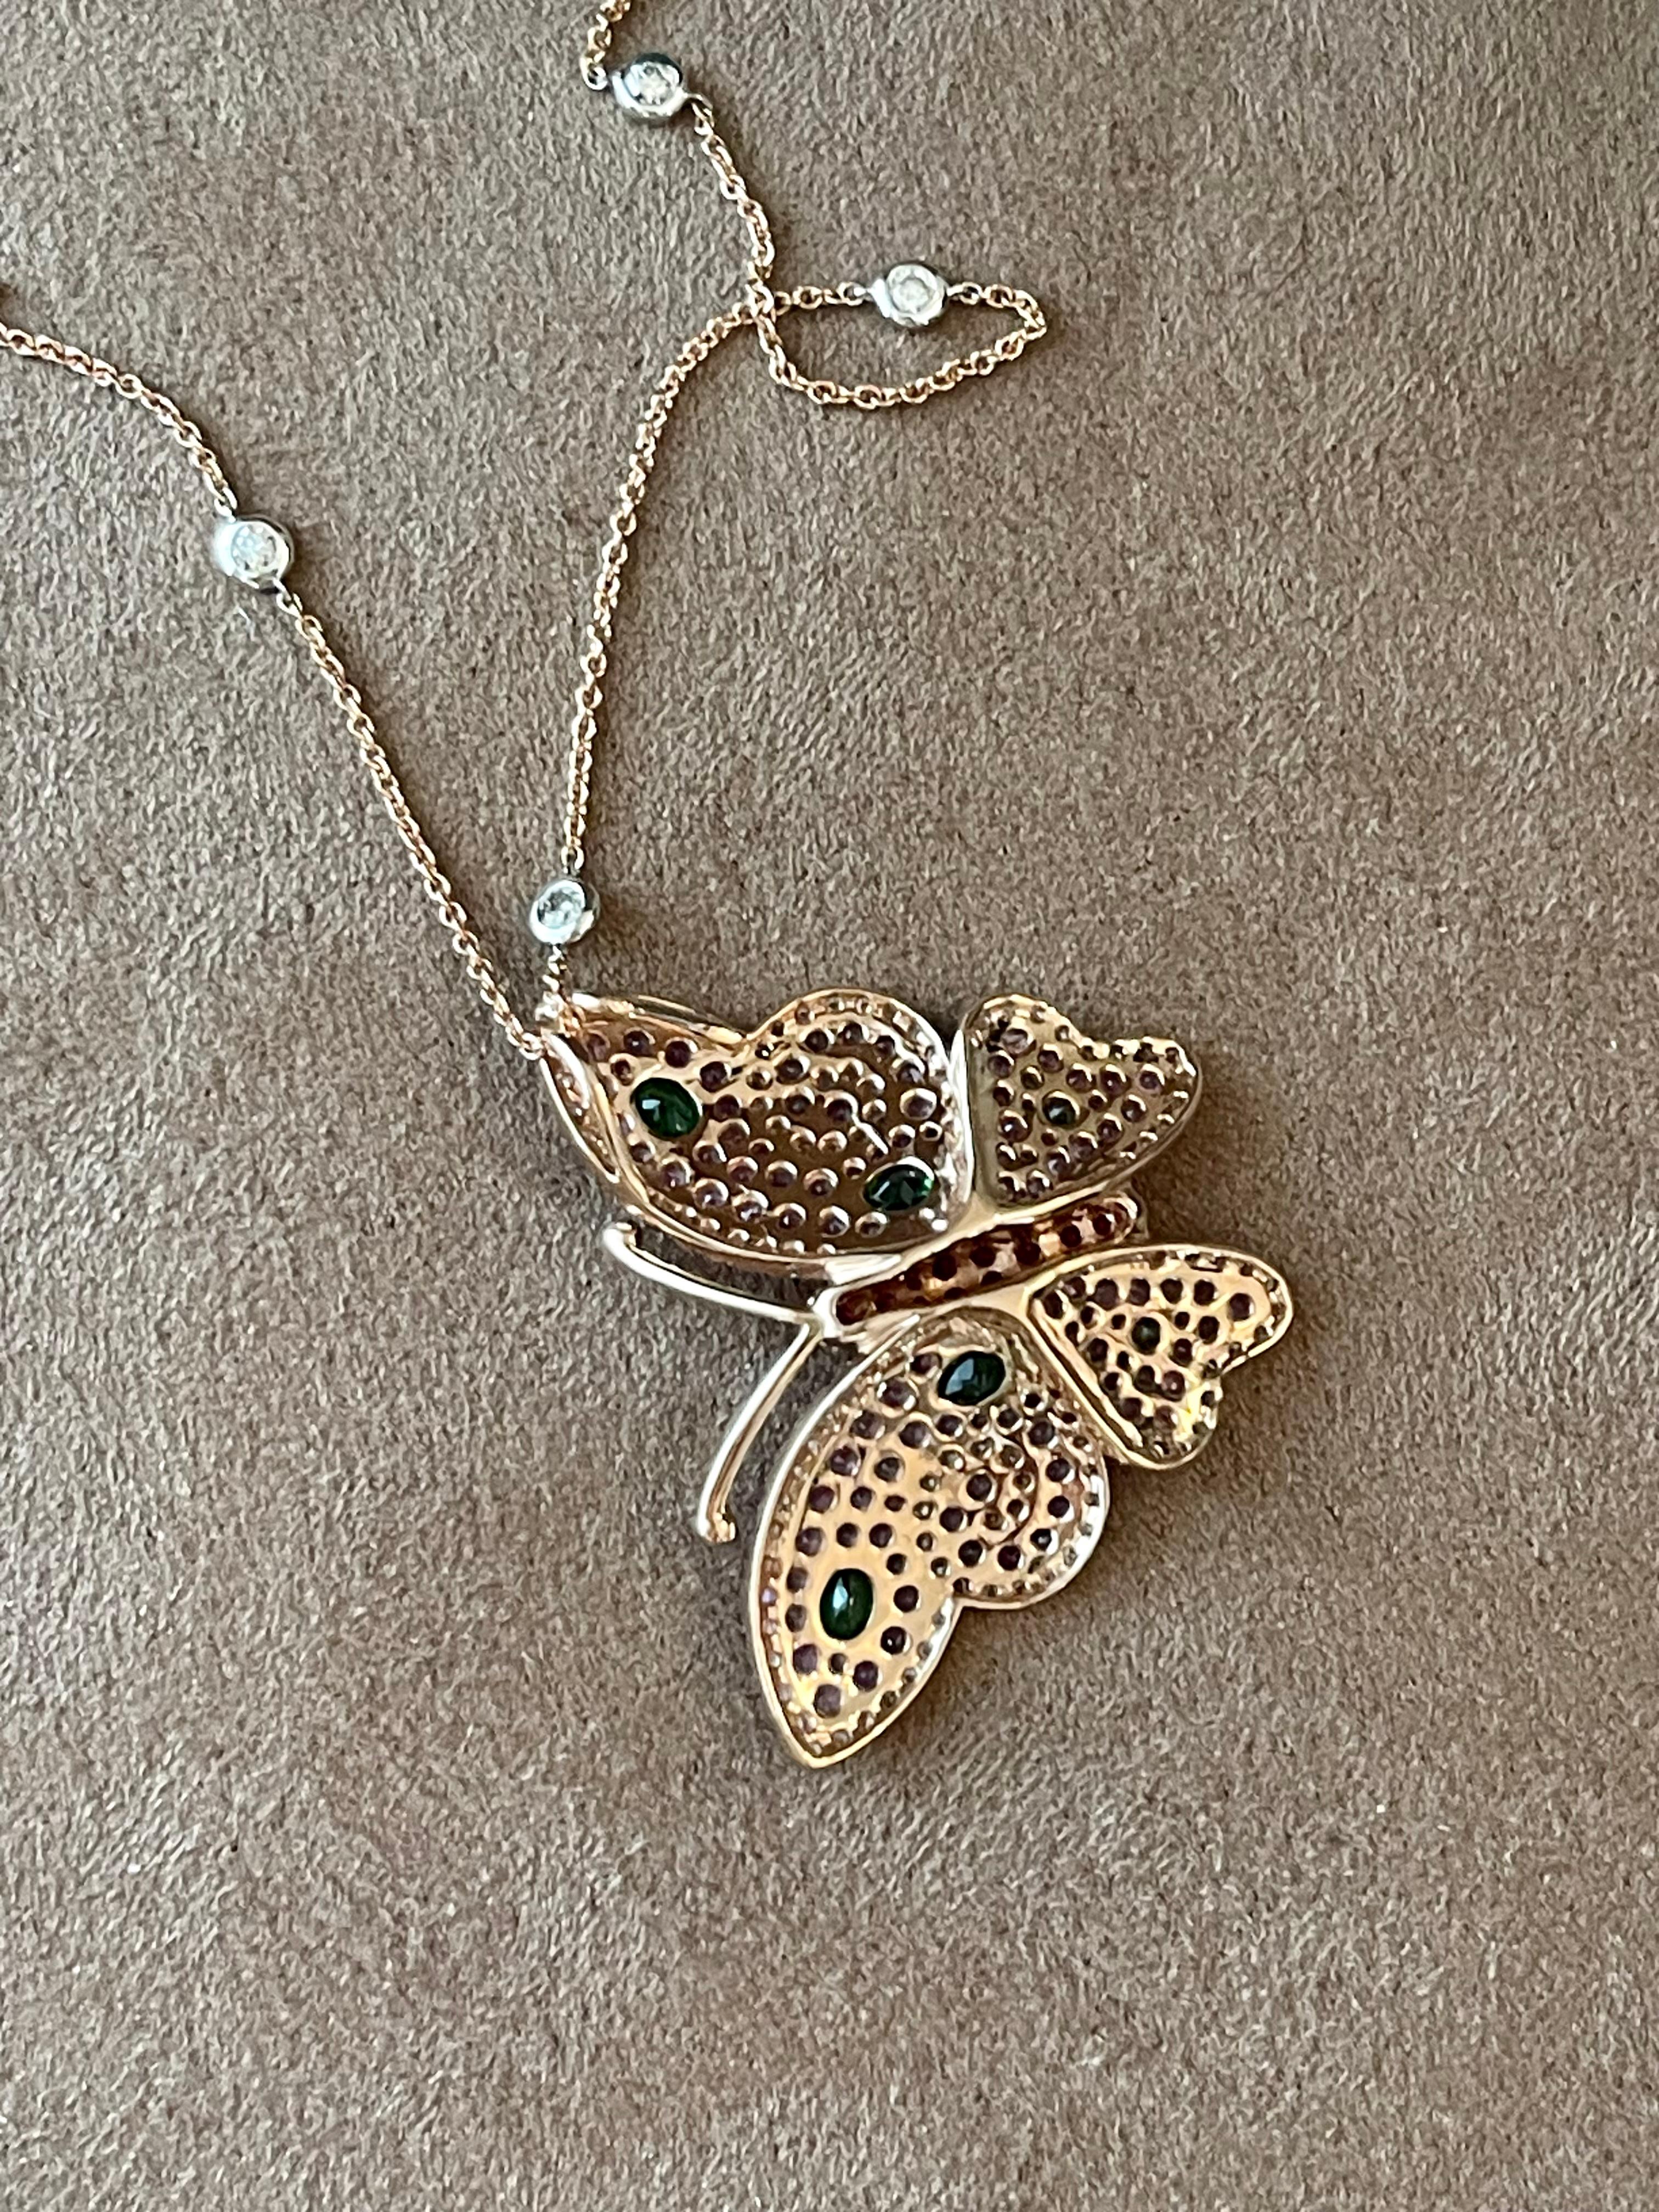 Fantastic 18 K rose Gold Butterfly pendant with chain. This butterfly is ready to take a flight covered with precious gems. The butterfly is covered with 29 pave set Rubies 0.53 ct, 106 pink Sapphires 1.65 ct, 6 vivid green Tsavorites 0.40 ct and